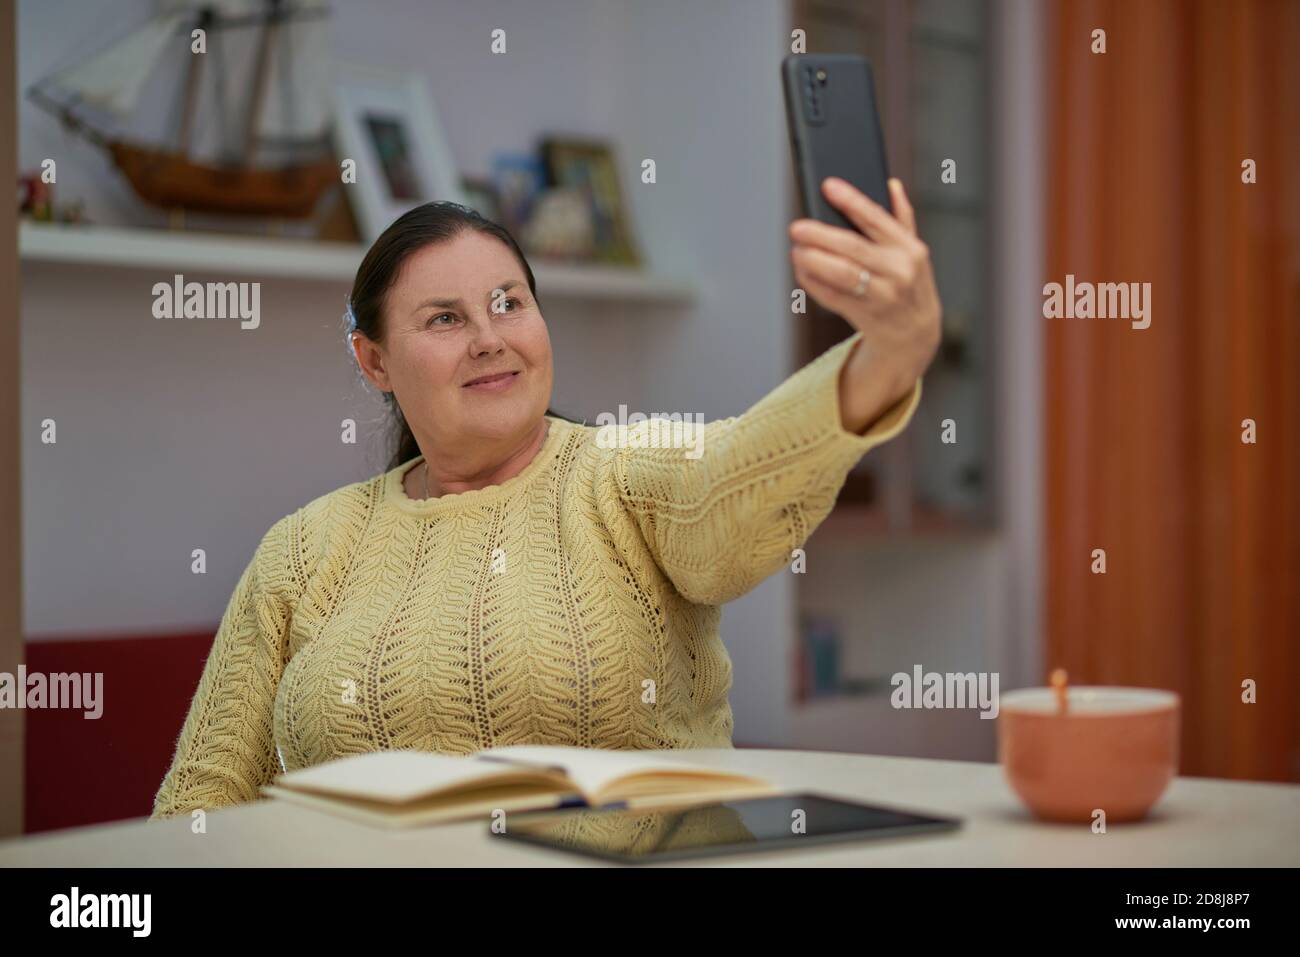 Senior woman in yellow sweater taking selfie with smart phone Stock Photo